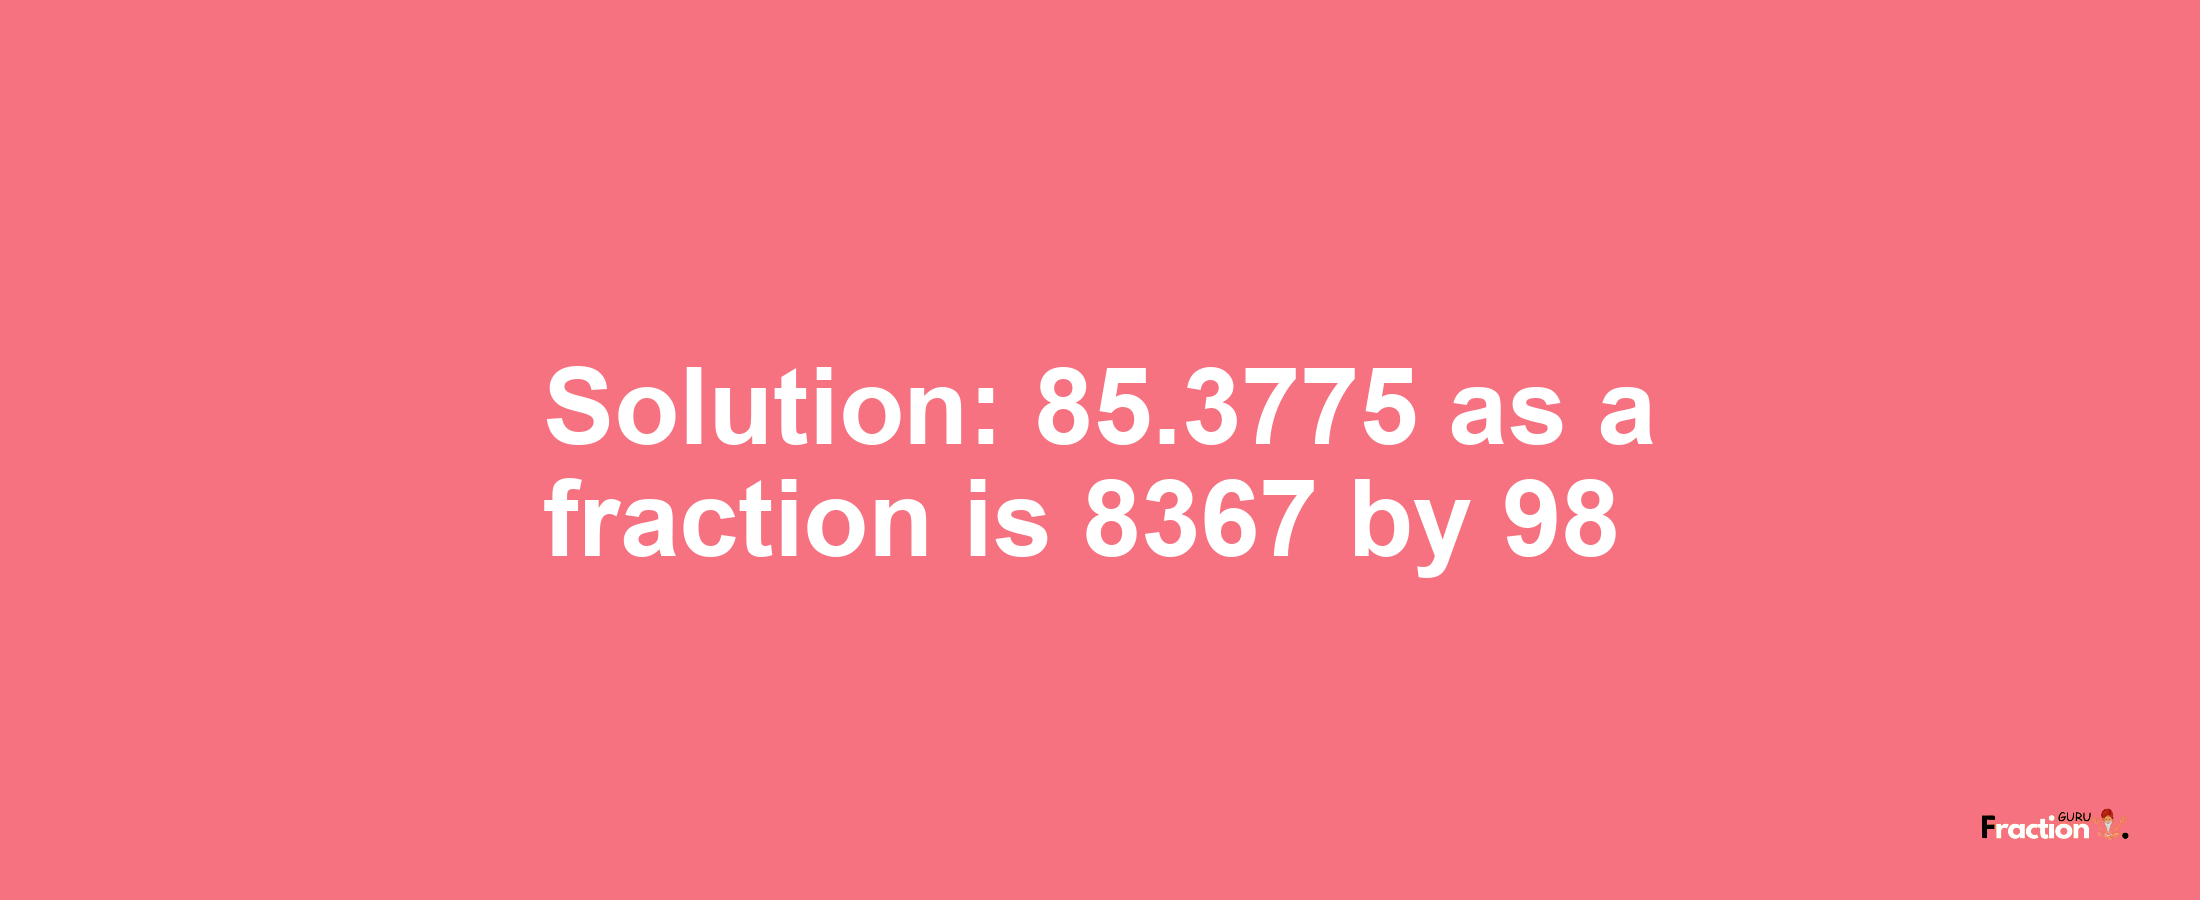 Solution:85.3775 as a fraction is 8367/98